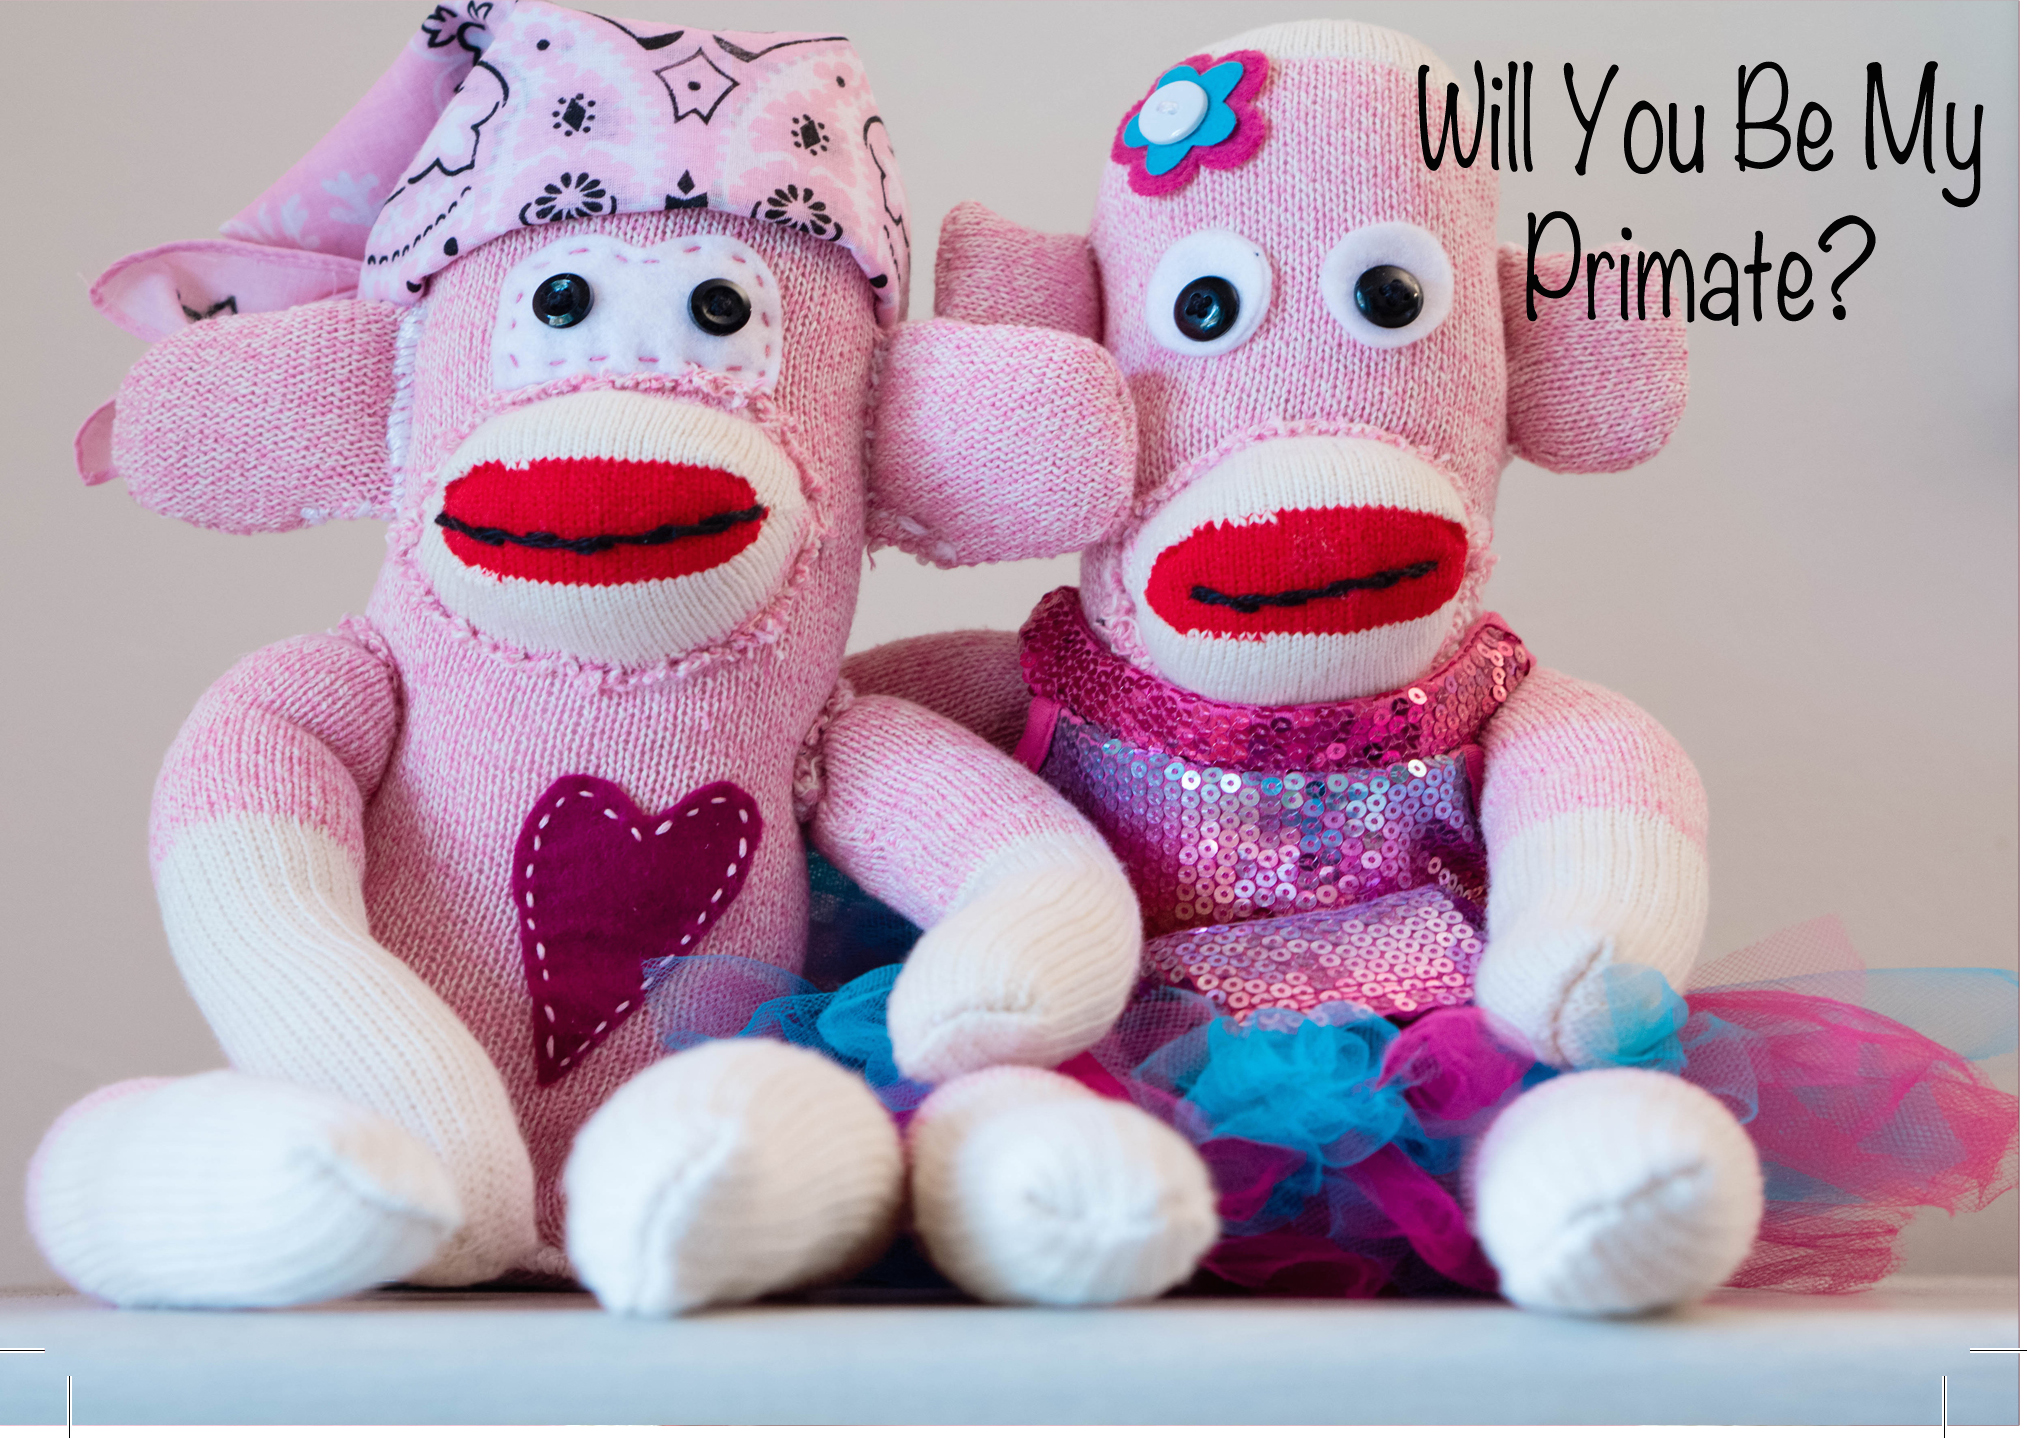 Will you be my primate?